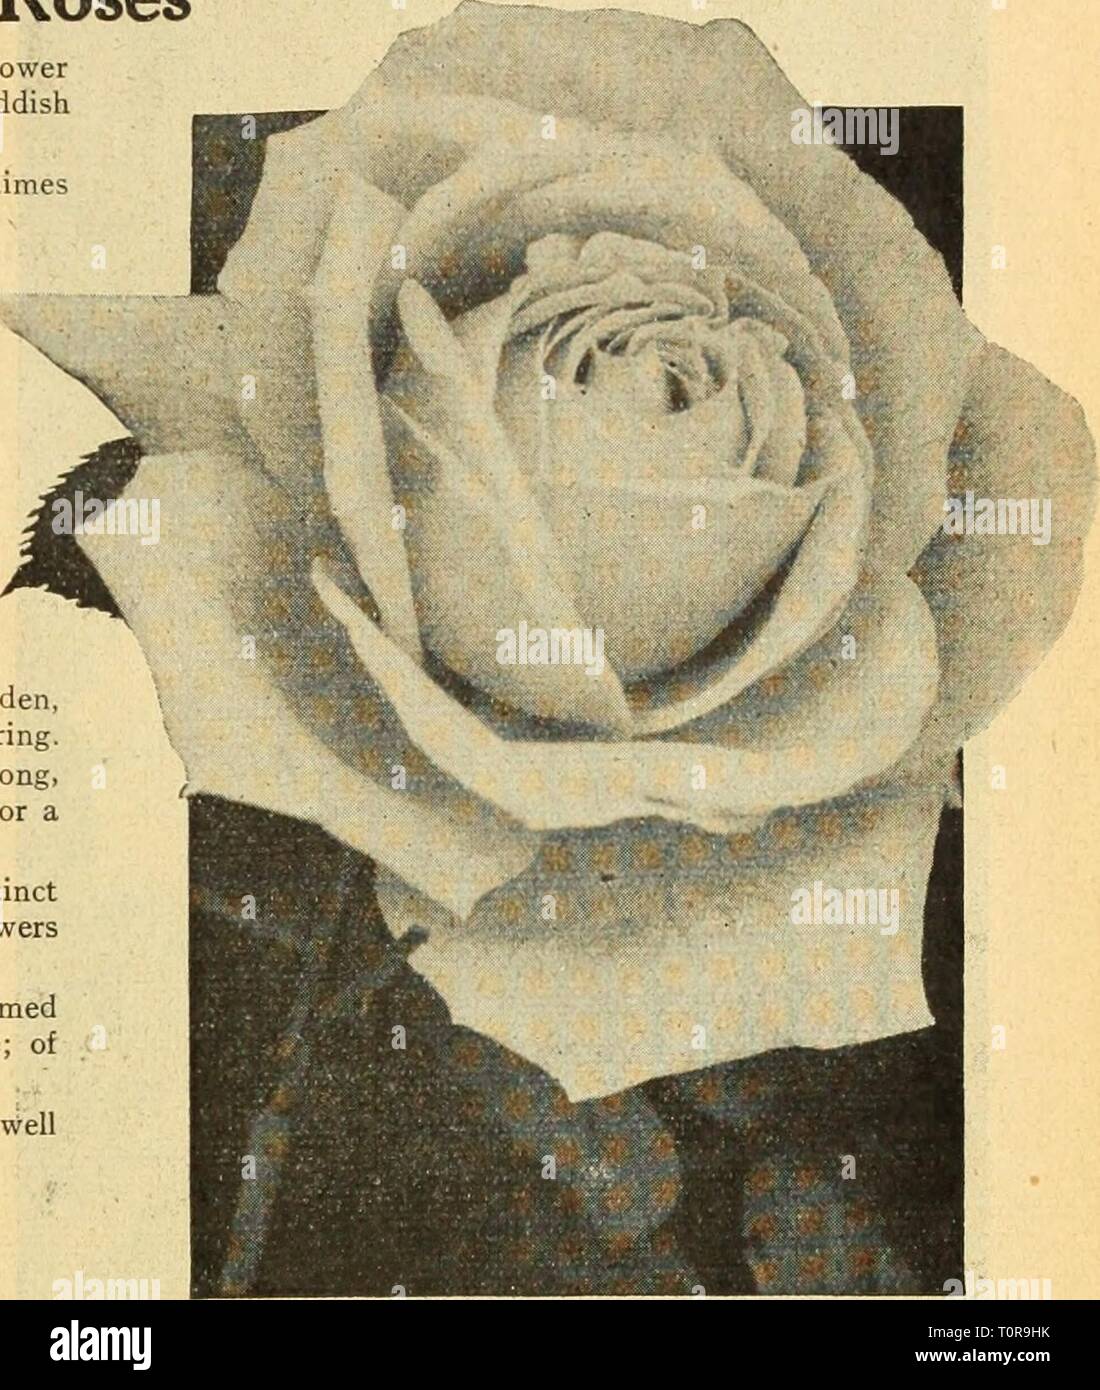 Dreer's autumn catalogue 1926 (1926) Dreer's autumn catalogue 1926  dreersautumncata1926henr Year: 1926 HYBRm-TEA Rose, Mrs. Wakefield Christie  Miller Mrs. Wakefield Christie-Miller. As a pink bedding Rose there is none  better. The flowers